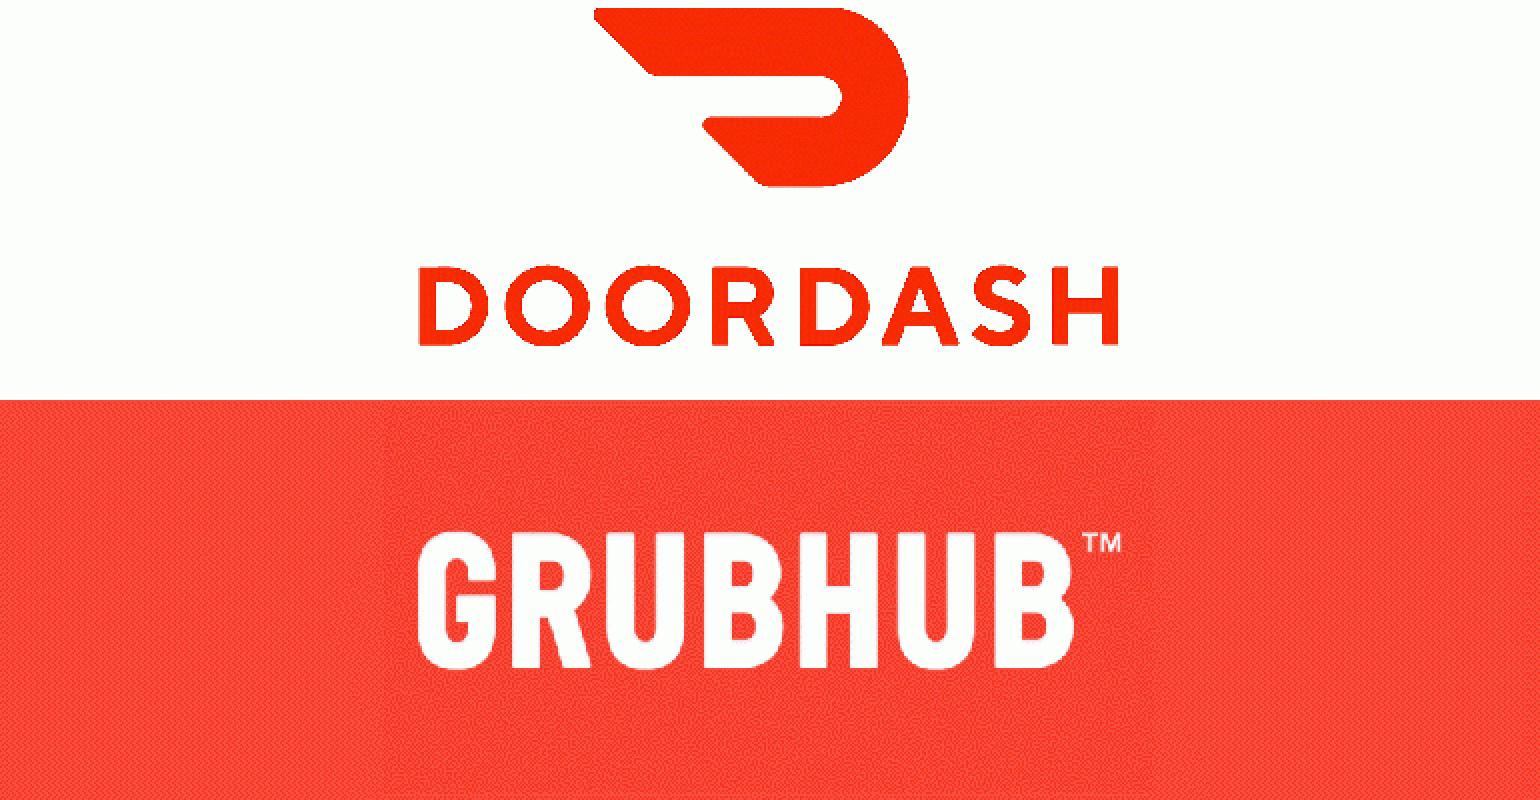 become a doordasher